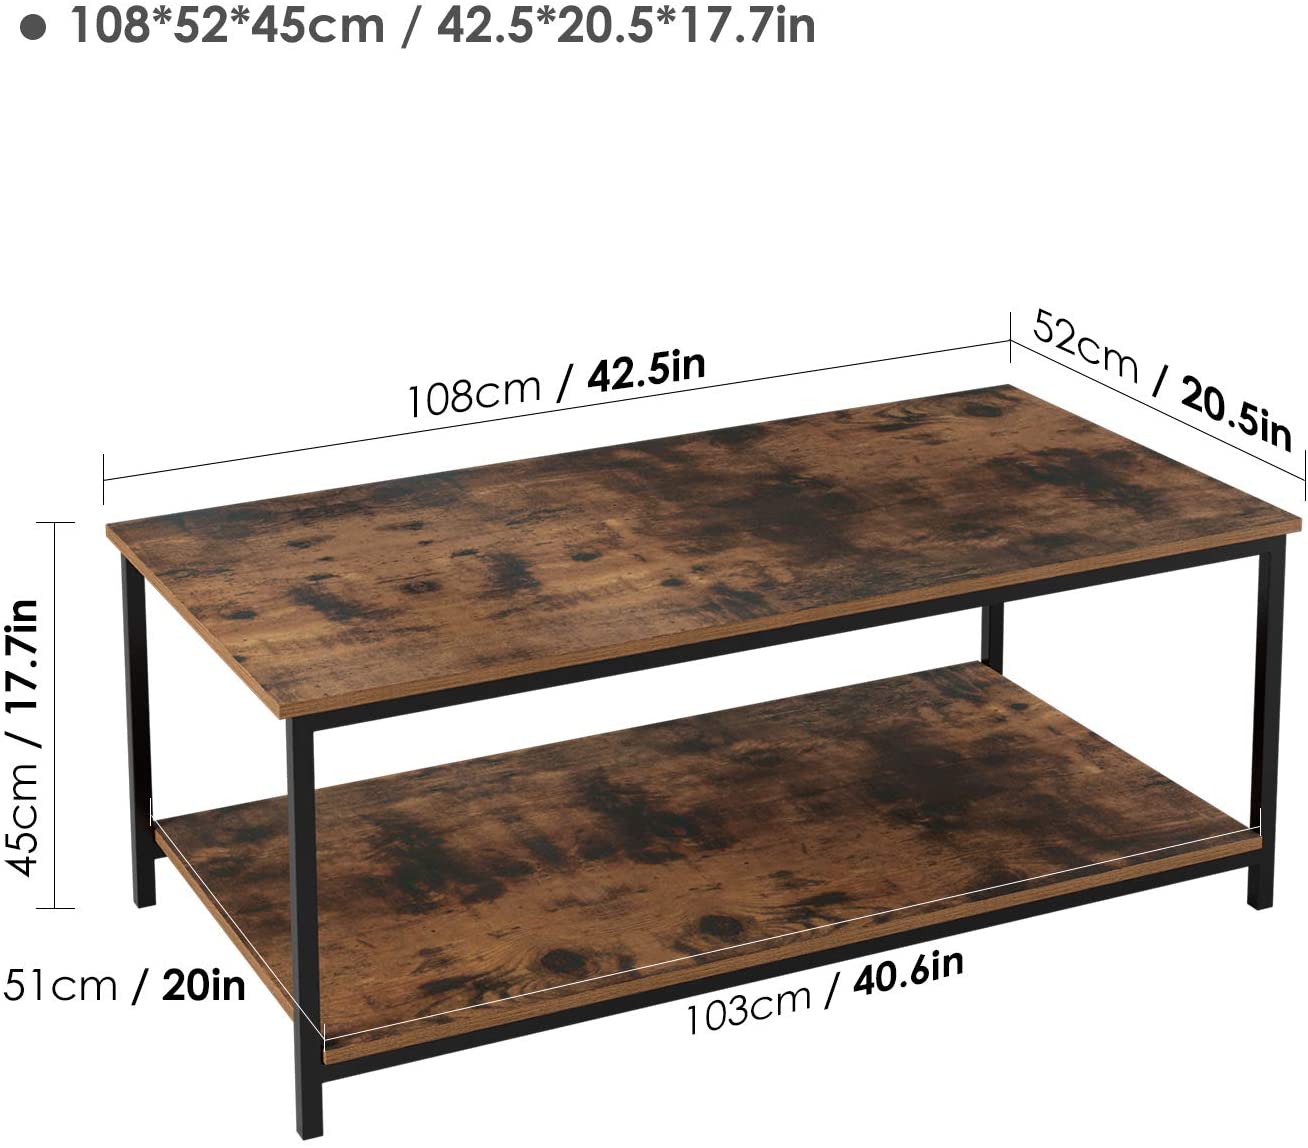 Coffee Tables | antique coffee table, Faster Shipping, featured, rectangle coffee table, Table for Coffee Machine, vintage furniture, Wood Coffee Table | Antique Style Rectangular Coffee Tabl